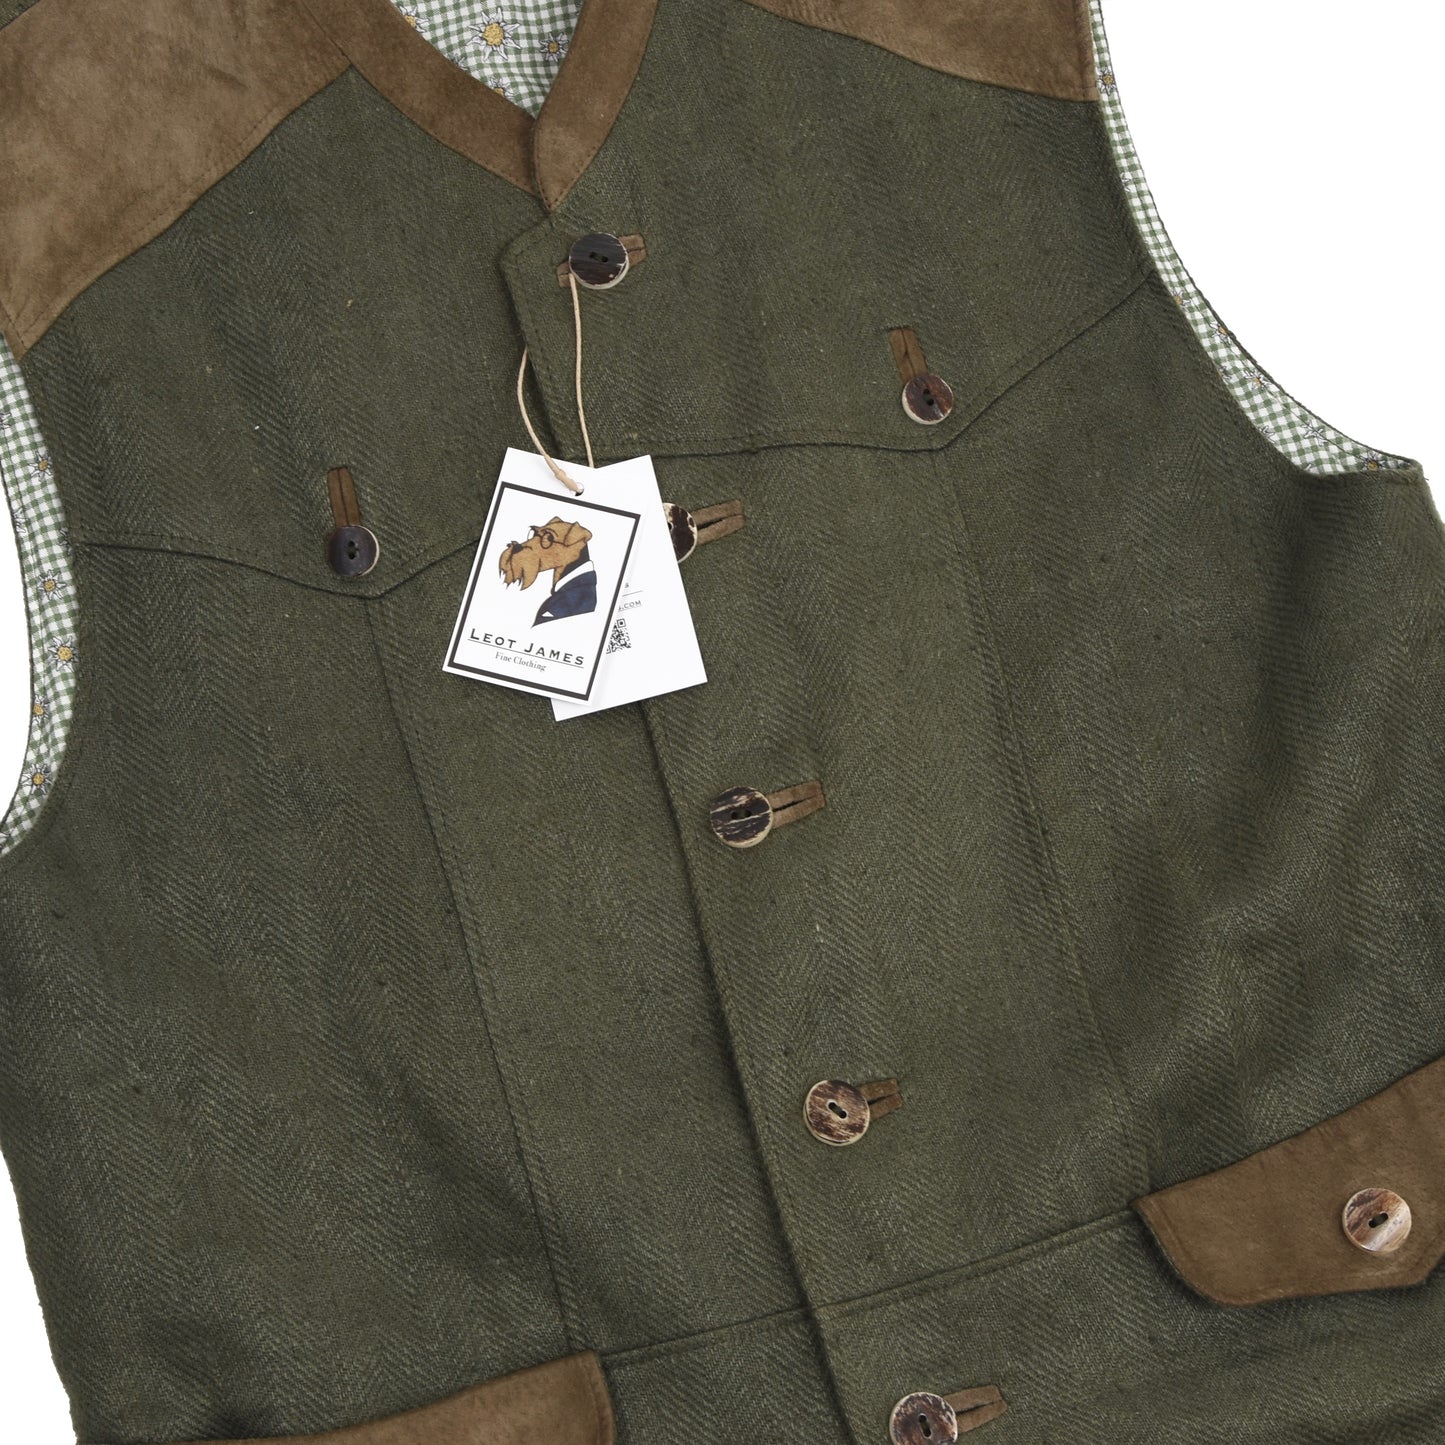 H. Moser Linen & Leather Vest/Trachtenweste Size 50 - Green